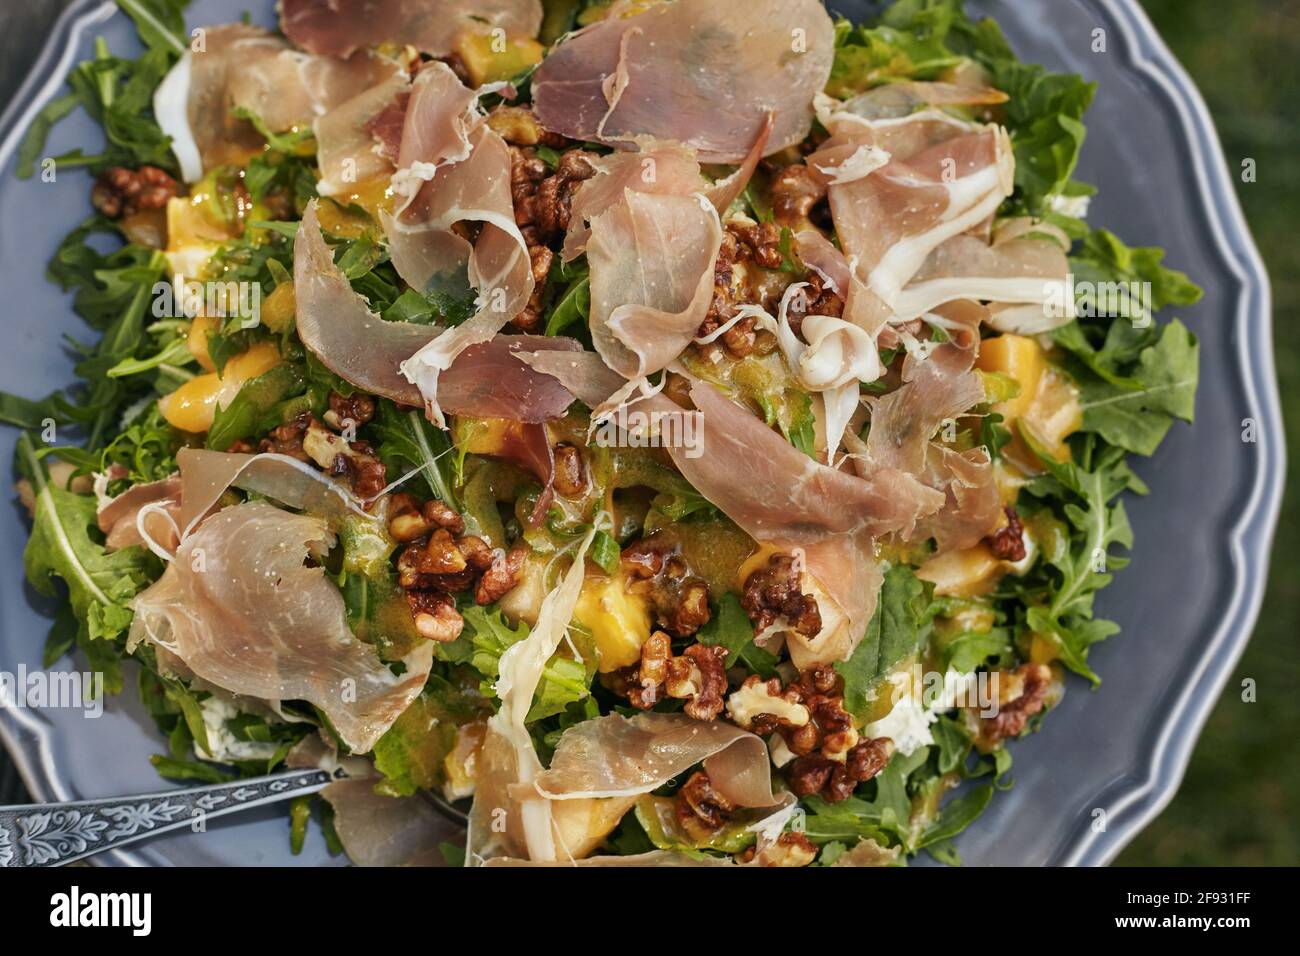 A wonderful salad of arugula, blue cheese, prosciutto, pear and caramelized nuts on a gray stylish plate . Top view Stock Photo